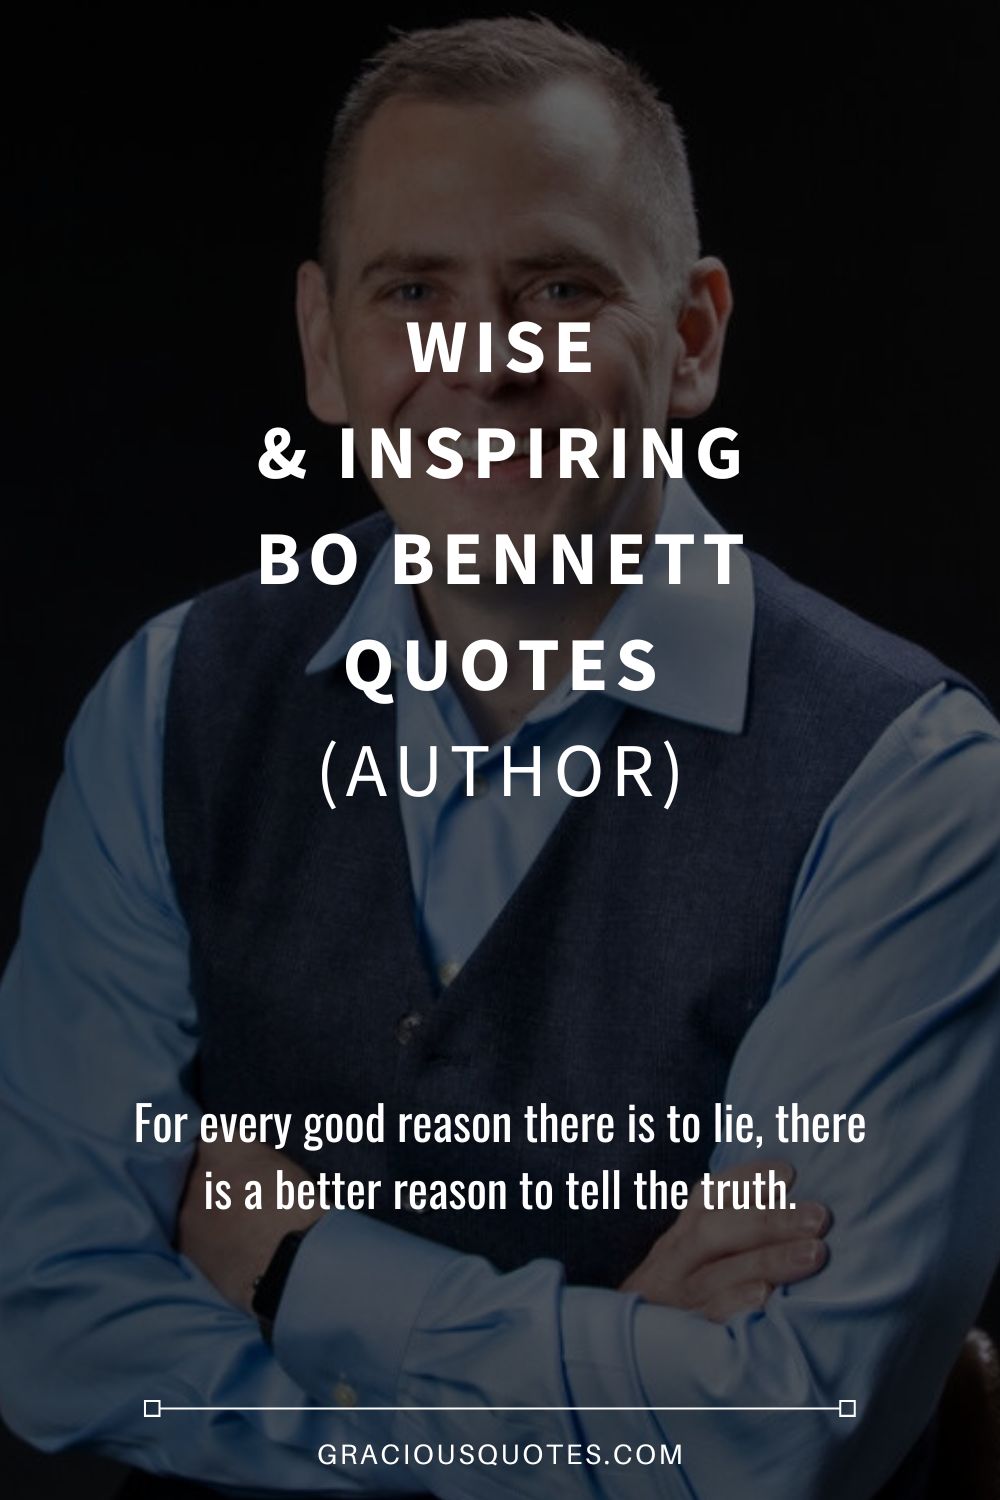 Wise & Inspiring Bo Bennett Quotes (AUTHOR) - Gracious Quotes